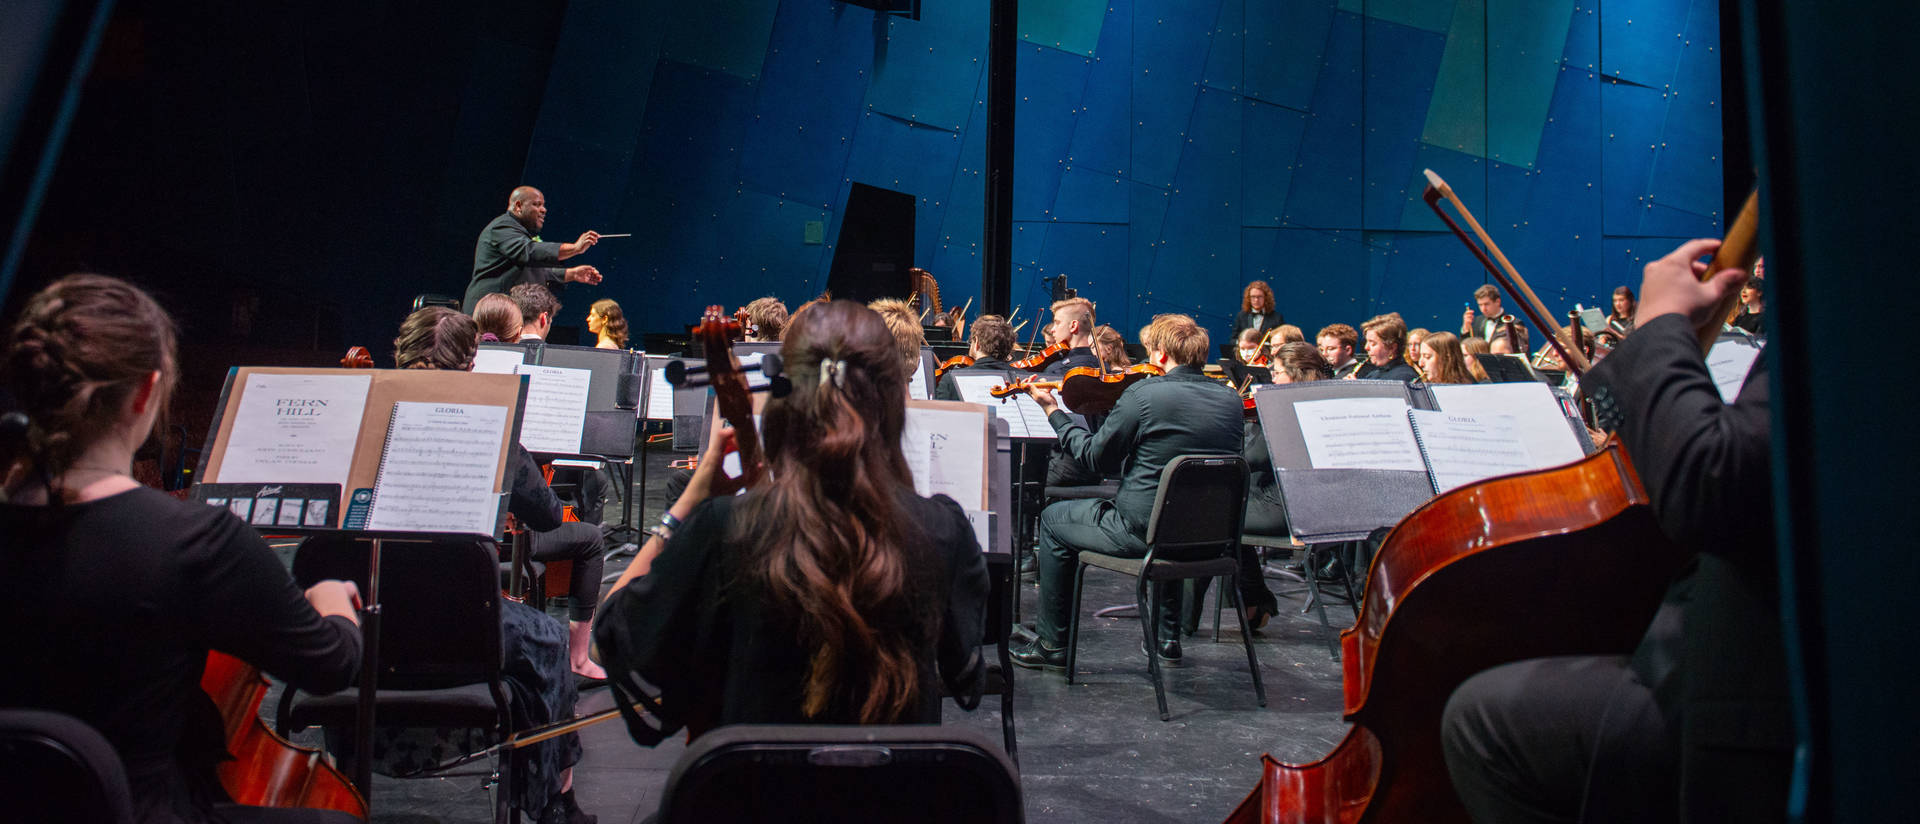 A director leads an orchestra performance on stage